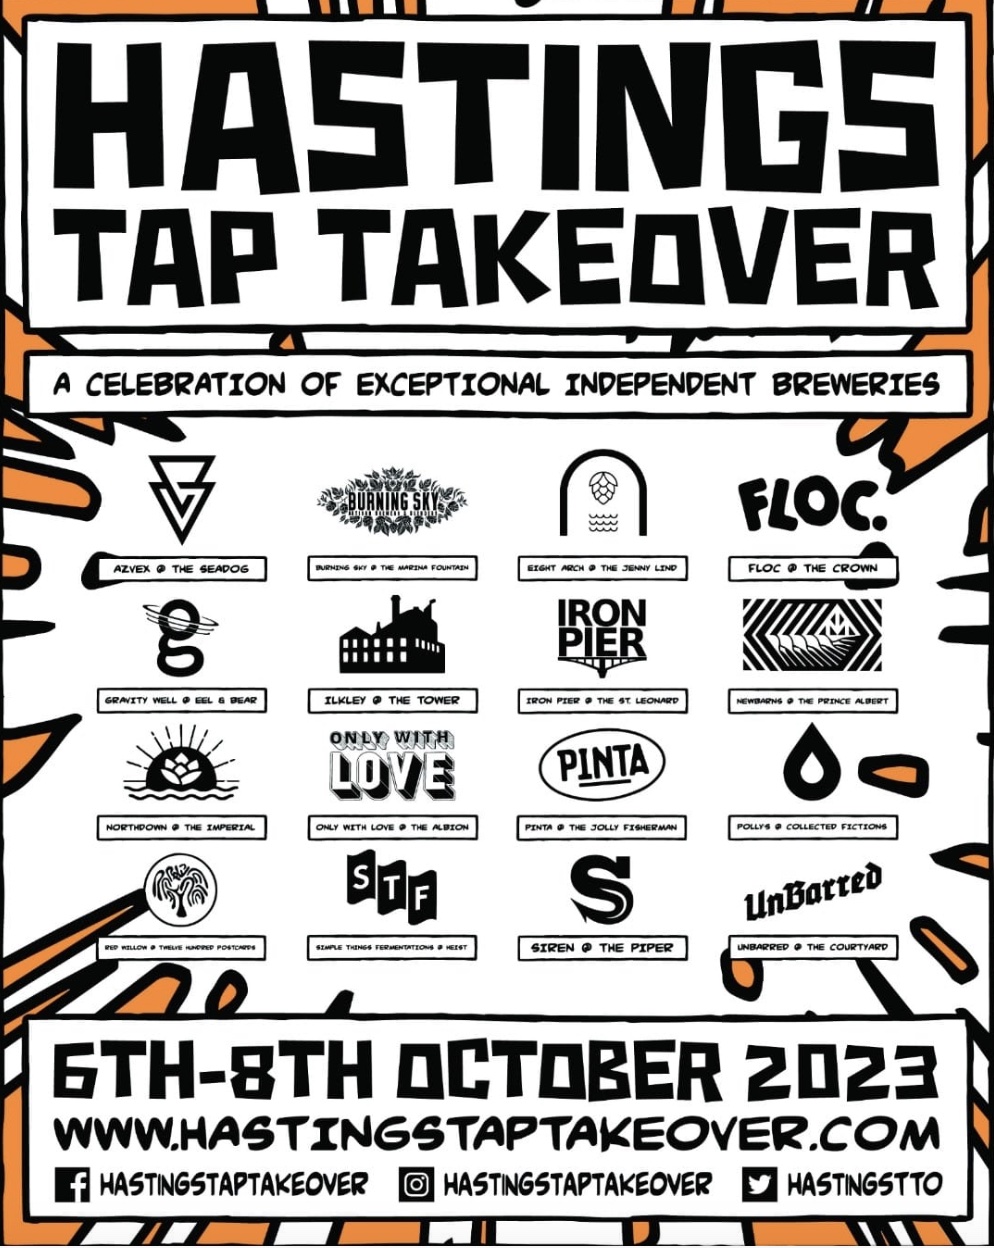 Poster for Hastings Tap Takeover